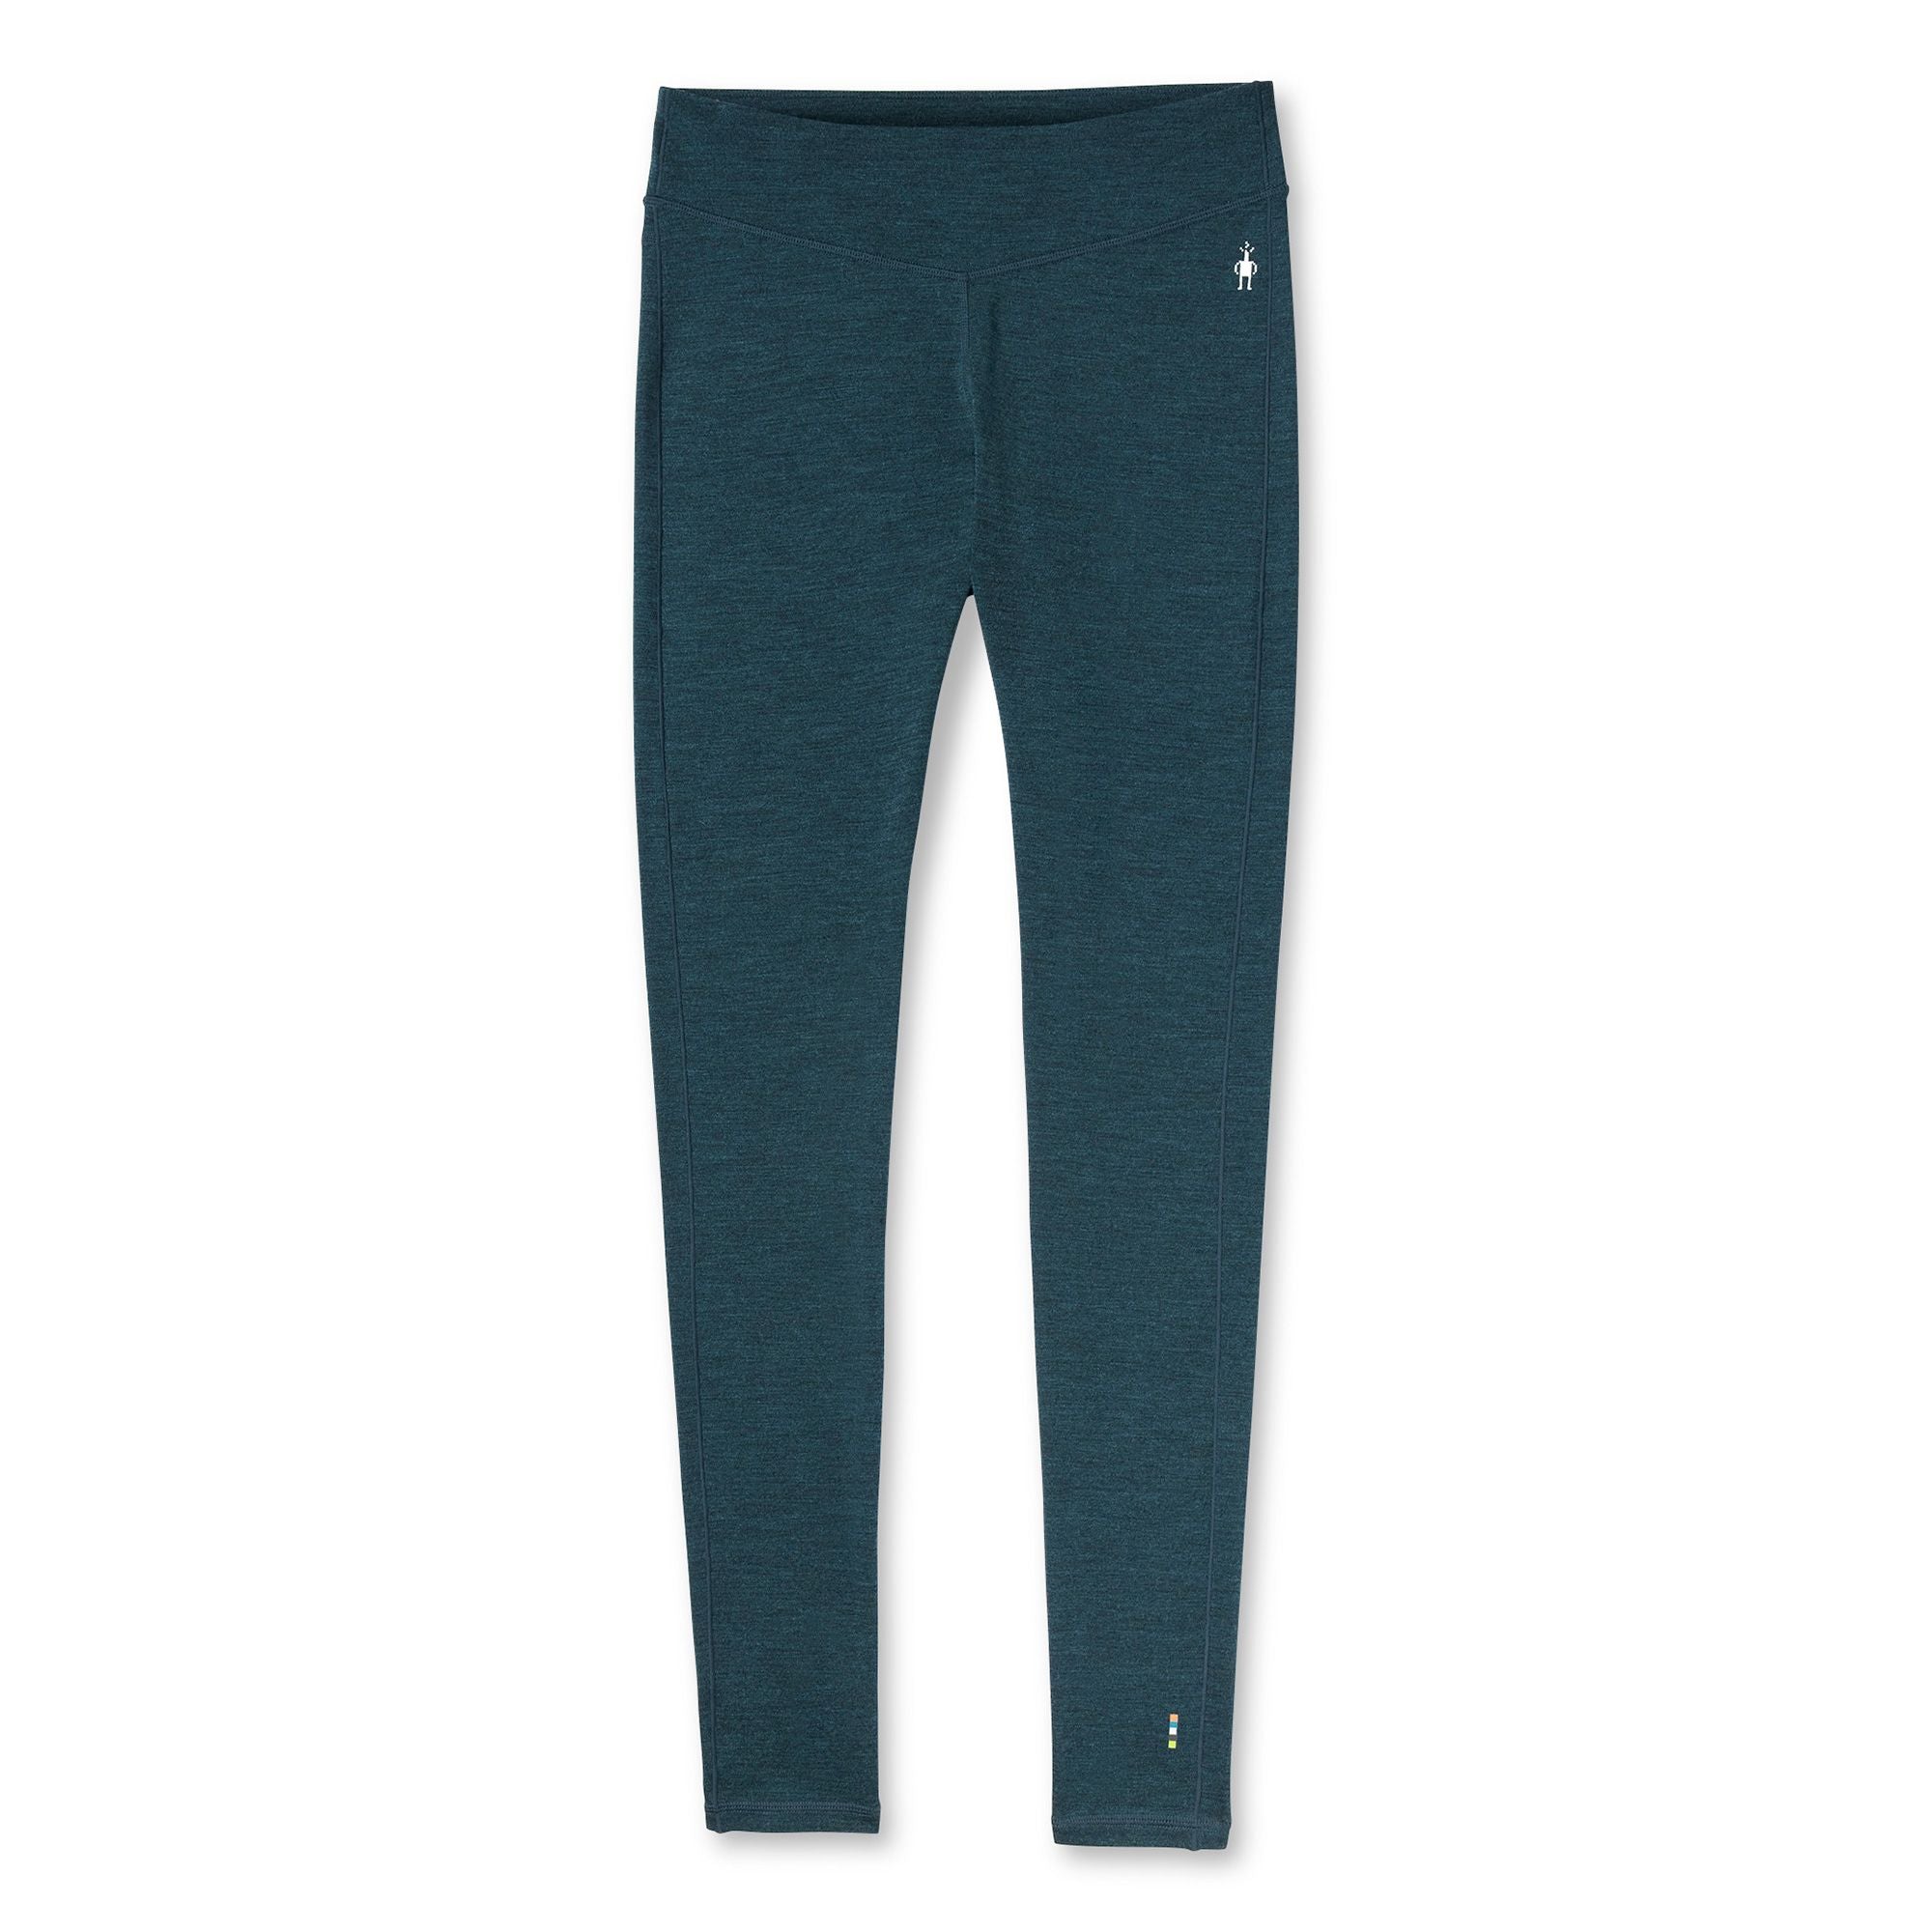 Smartwool - Womens NTS 195 Leggings - Smartwool 15 :  Clothing-Women-Baselayer (thermals) : Living Simply Auckland Ltd